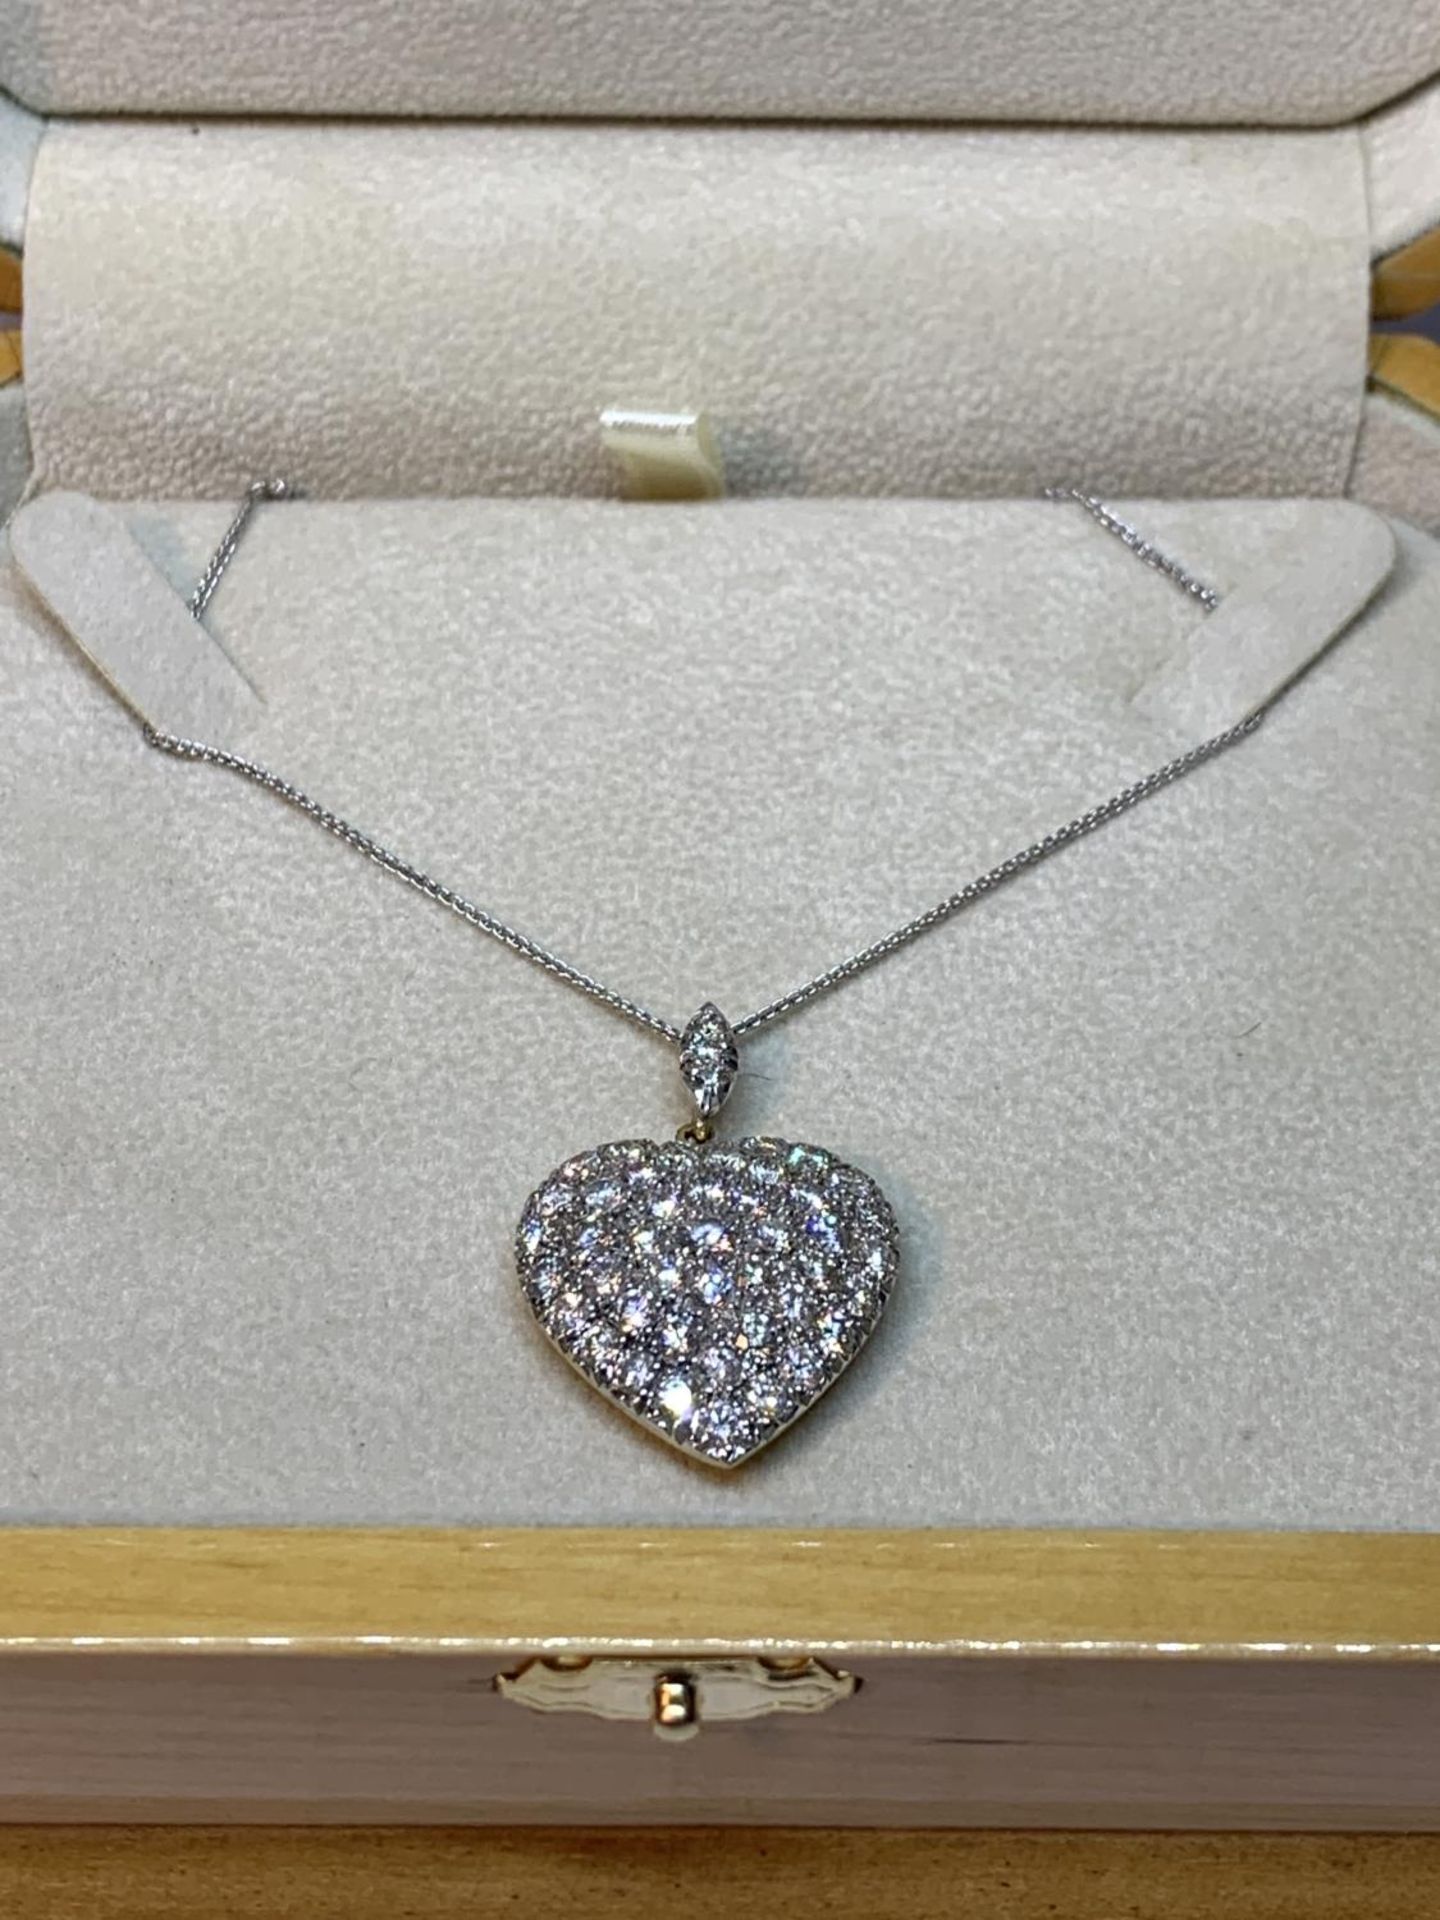 A 15 CARAT WHITE AND YELLOW GOLD LARGE DIAMOND ENCRUSTED HEART PENDANT WITH CHAIN LENGTH 44CM IN A